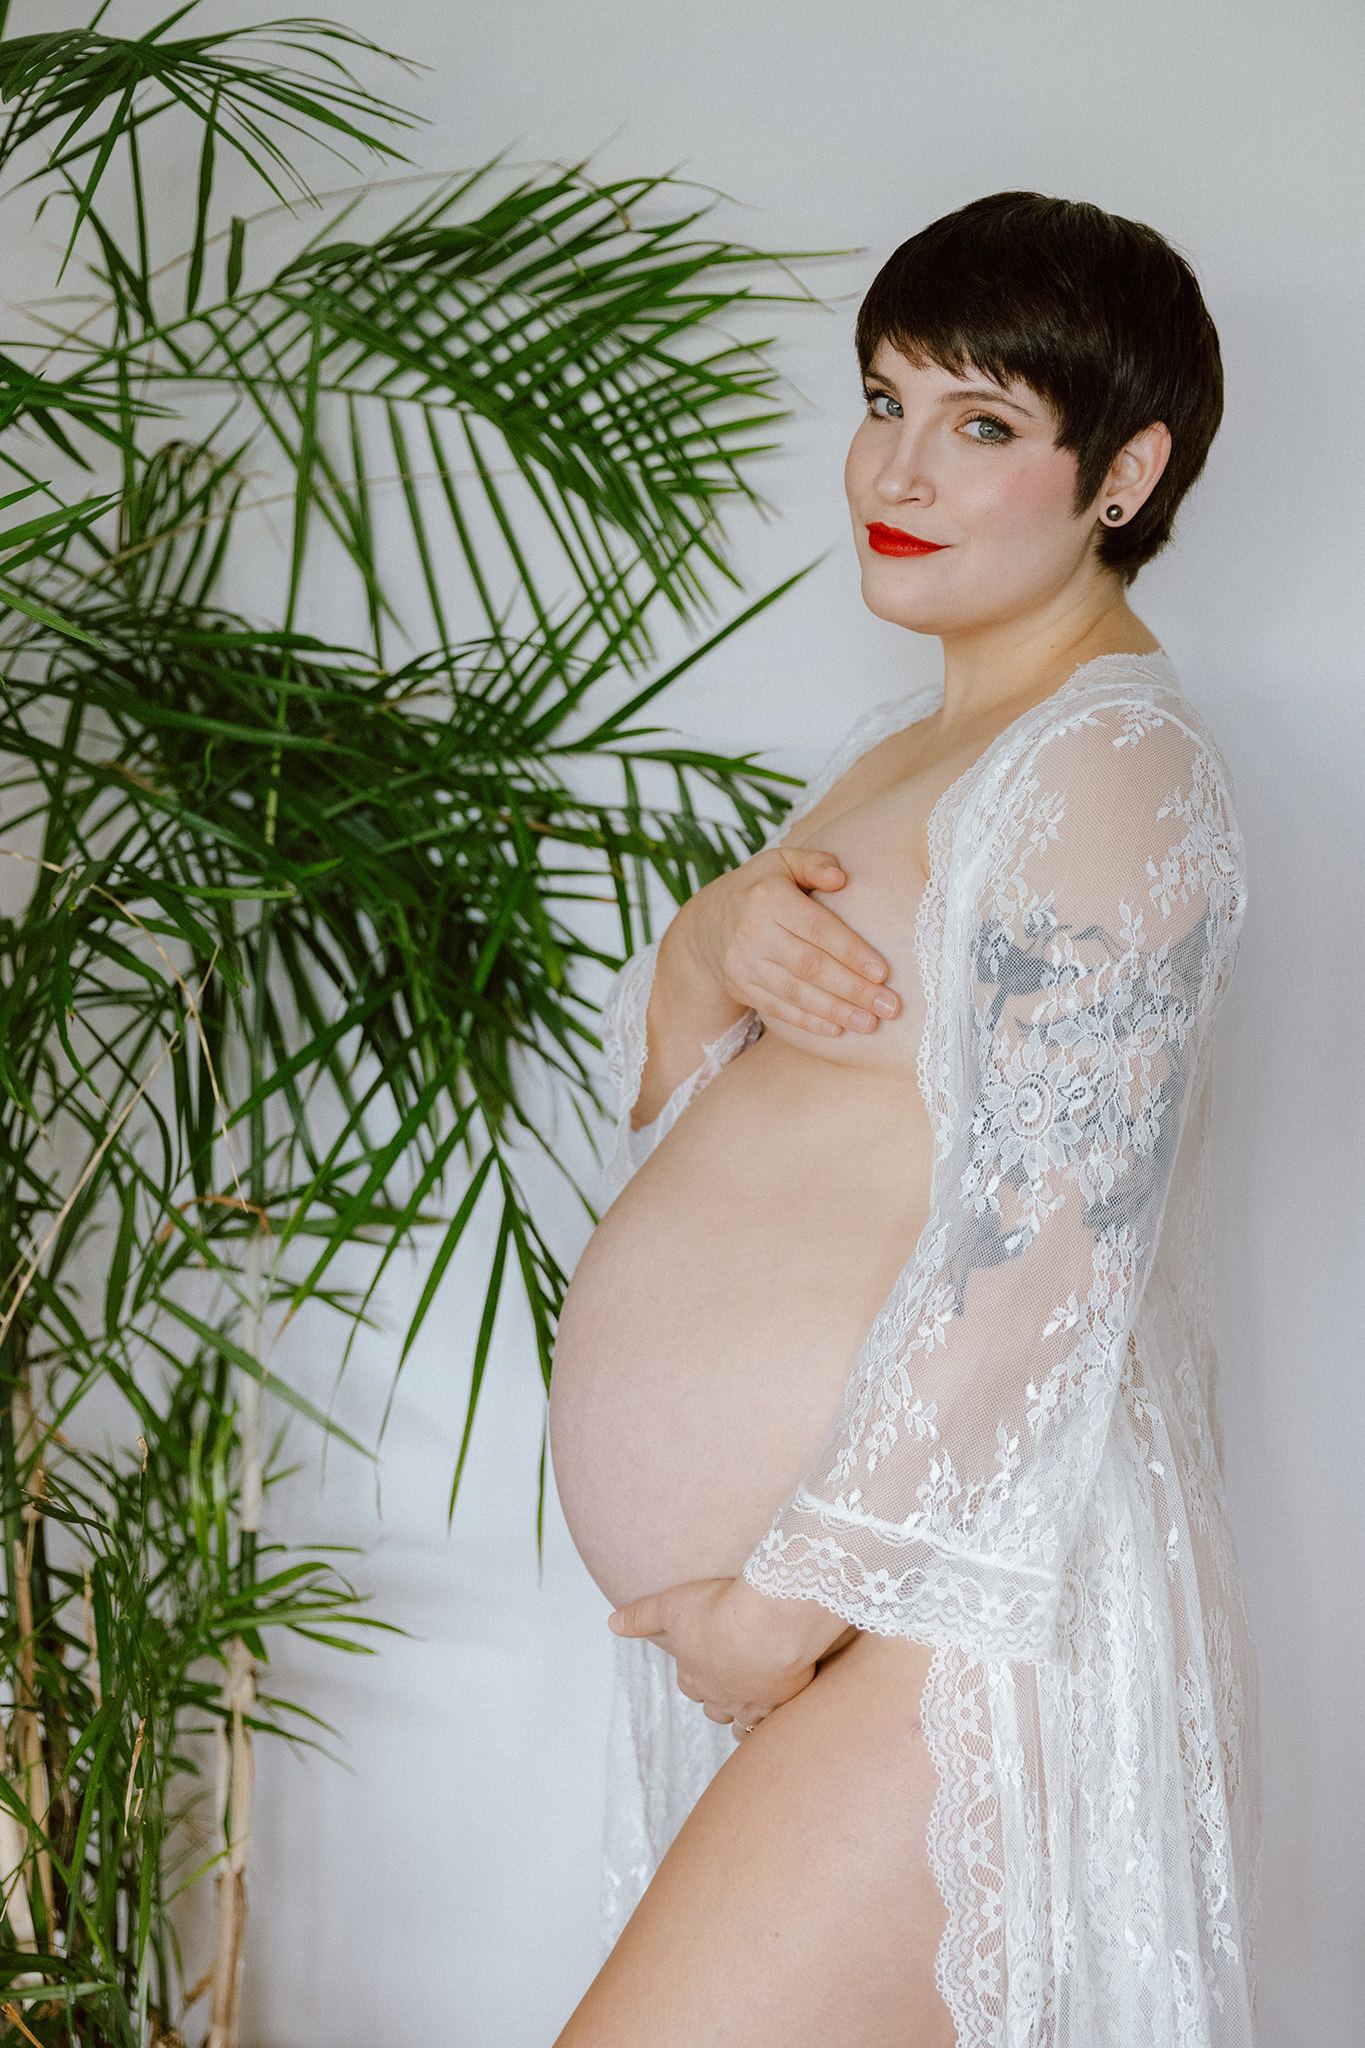 Sexy maternity photos at home with natural light